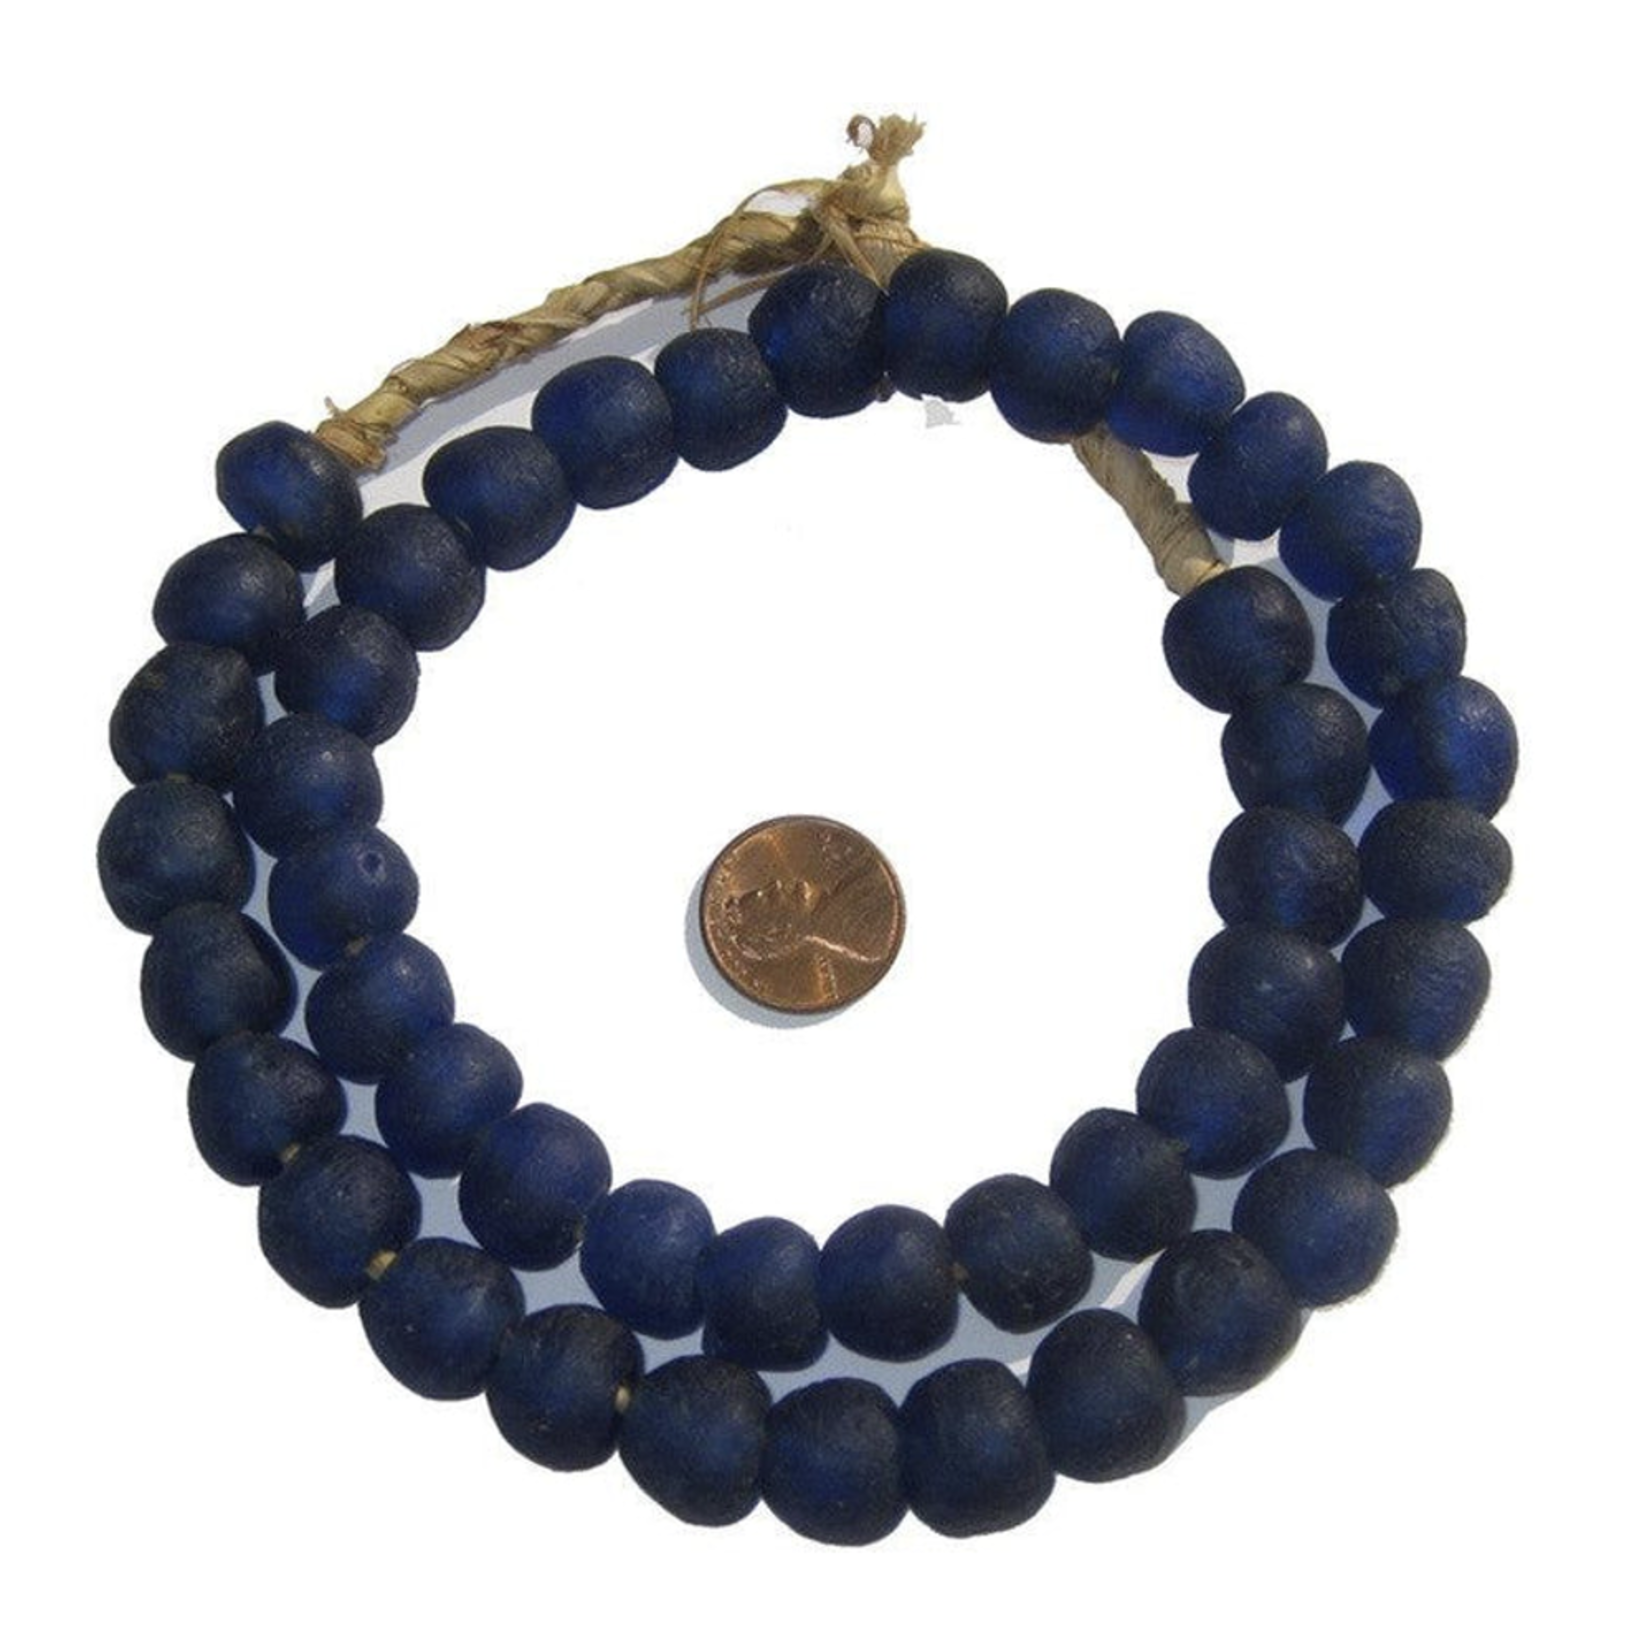 Outside The Box 26" Cobalt Blue Recycled Glass Beads 14MM